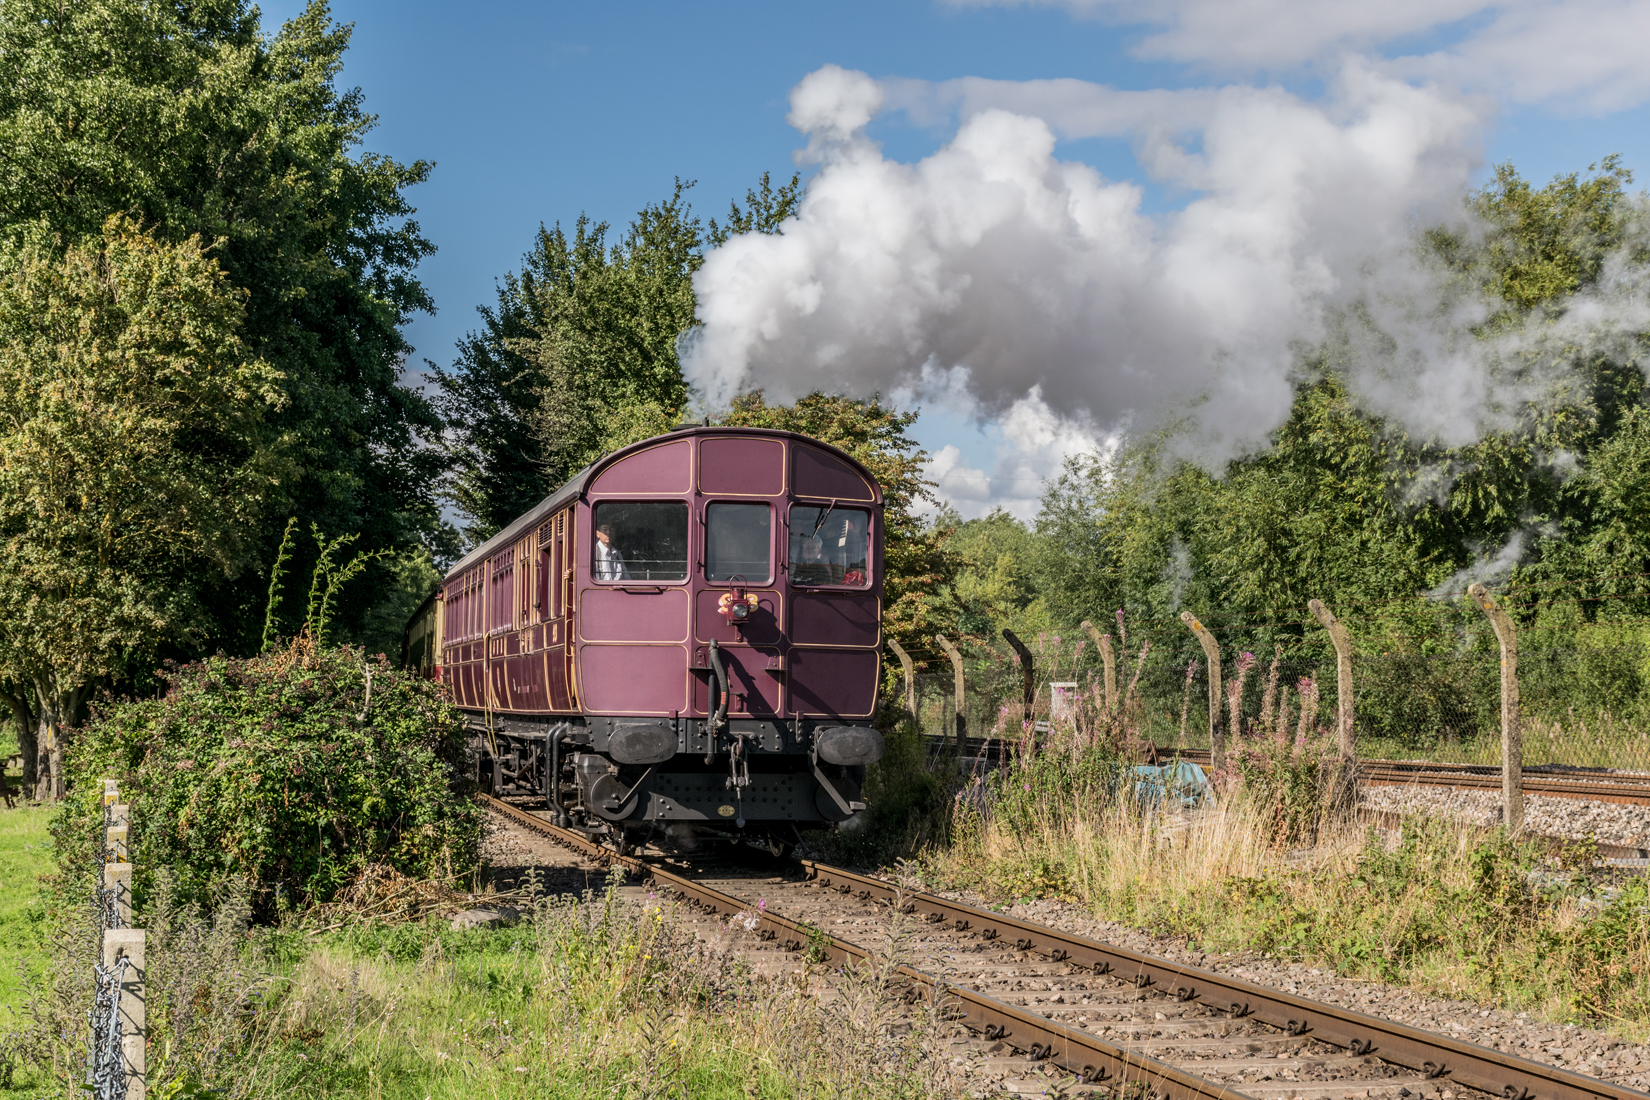 Steam Railmotor No. 93 accelerates away from Oxford Road Station